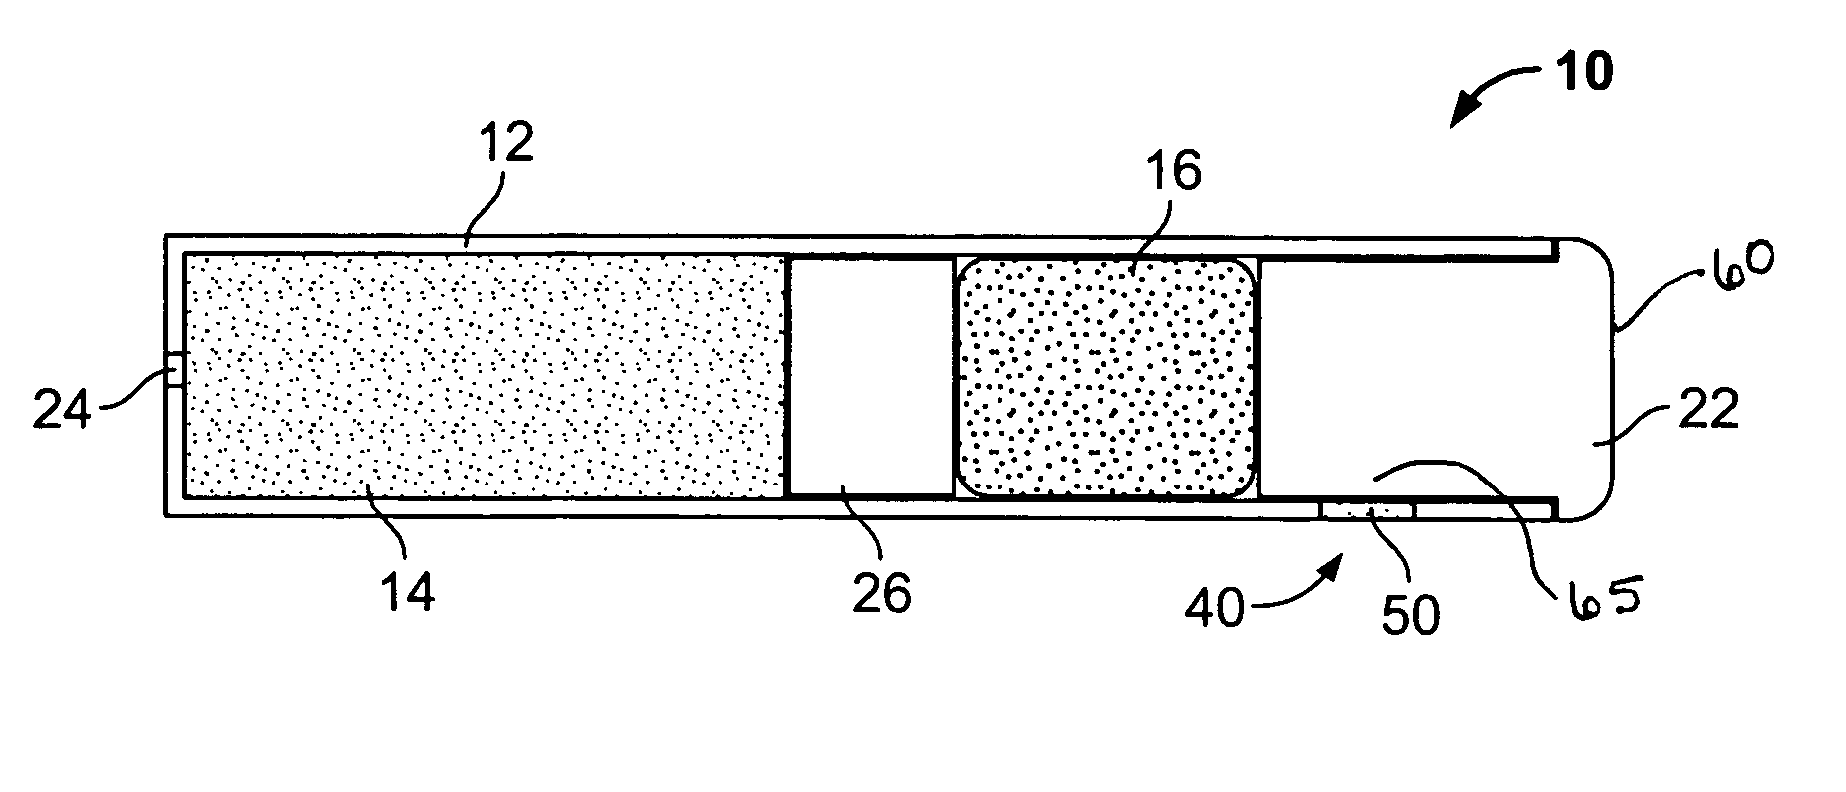 Osmotically driven active agent delivery device providing an ascending release profile